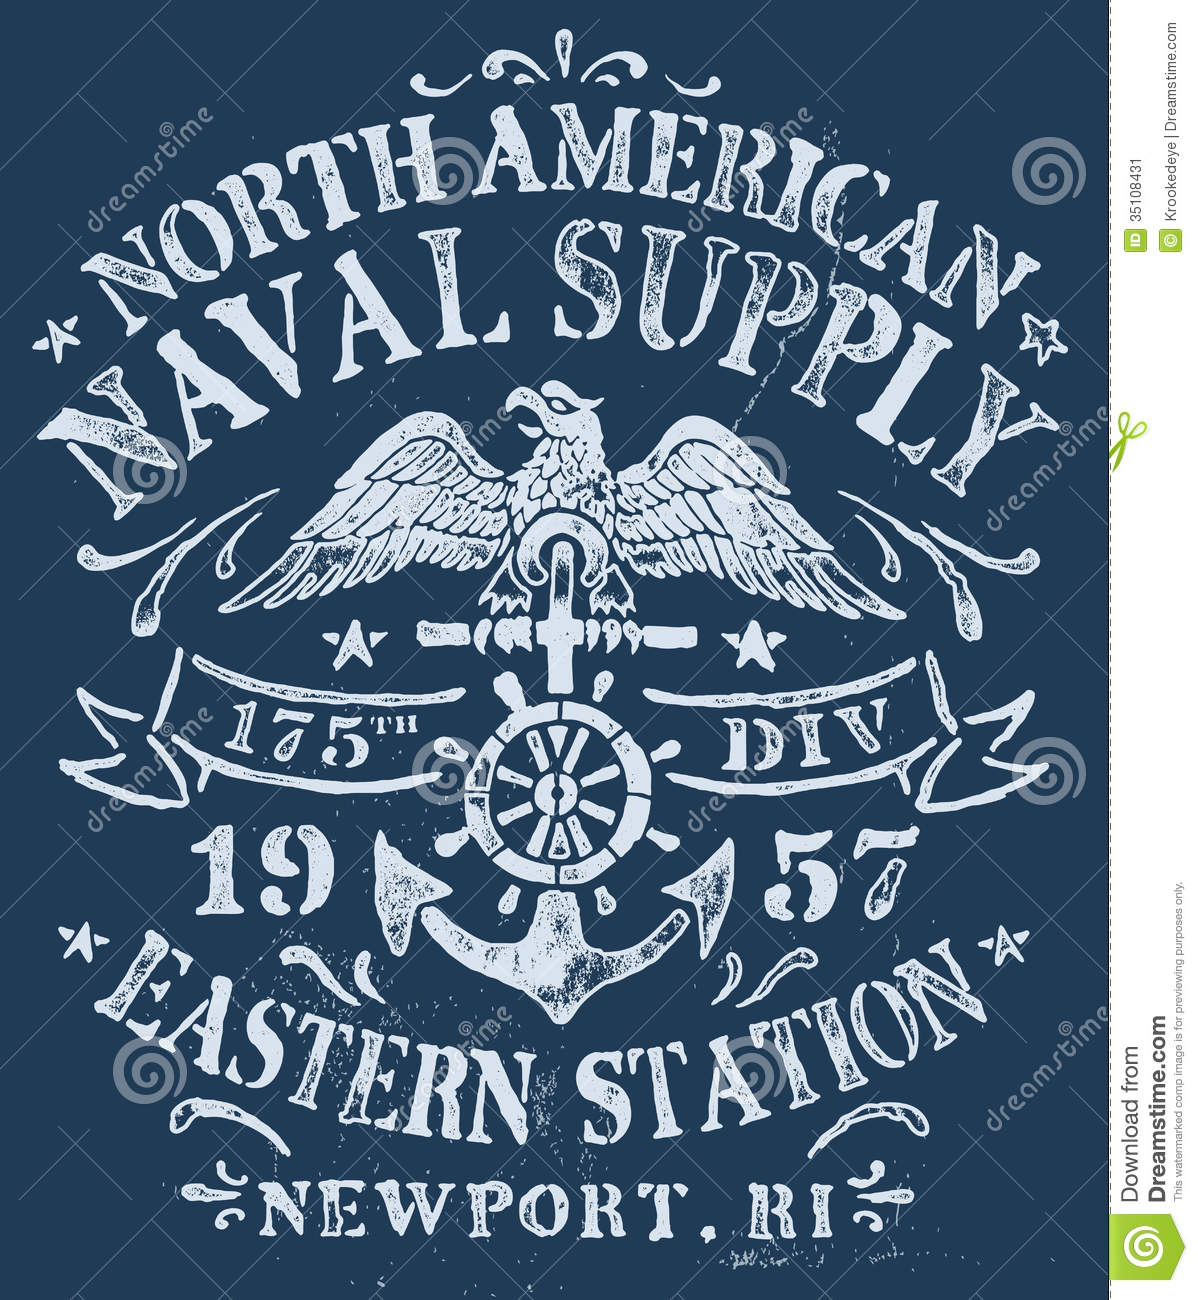 Image Vintage Nautical Pc Android iPhone And iPad Wallpaper